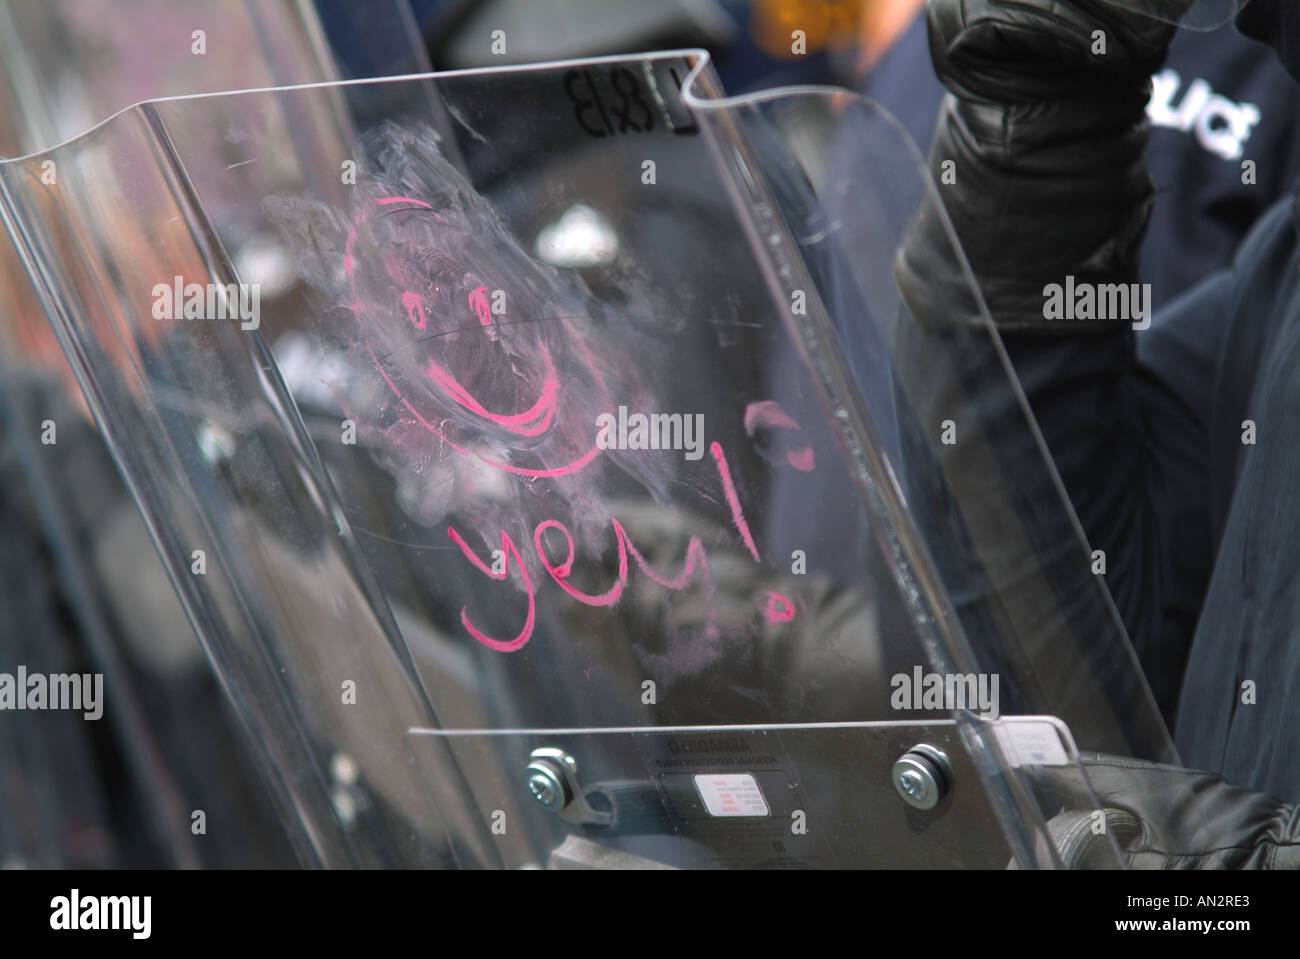 Smiley face drawn with lipstick on a riot policeman's shield Stock Photo